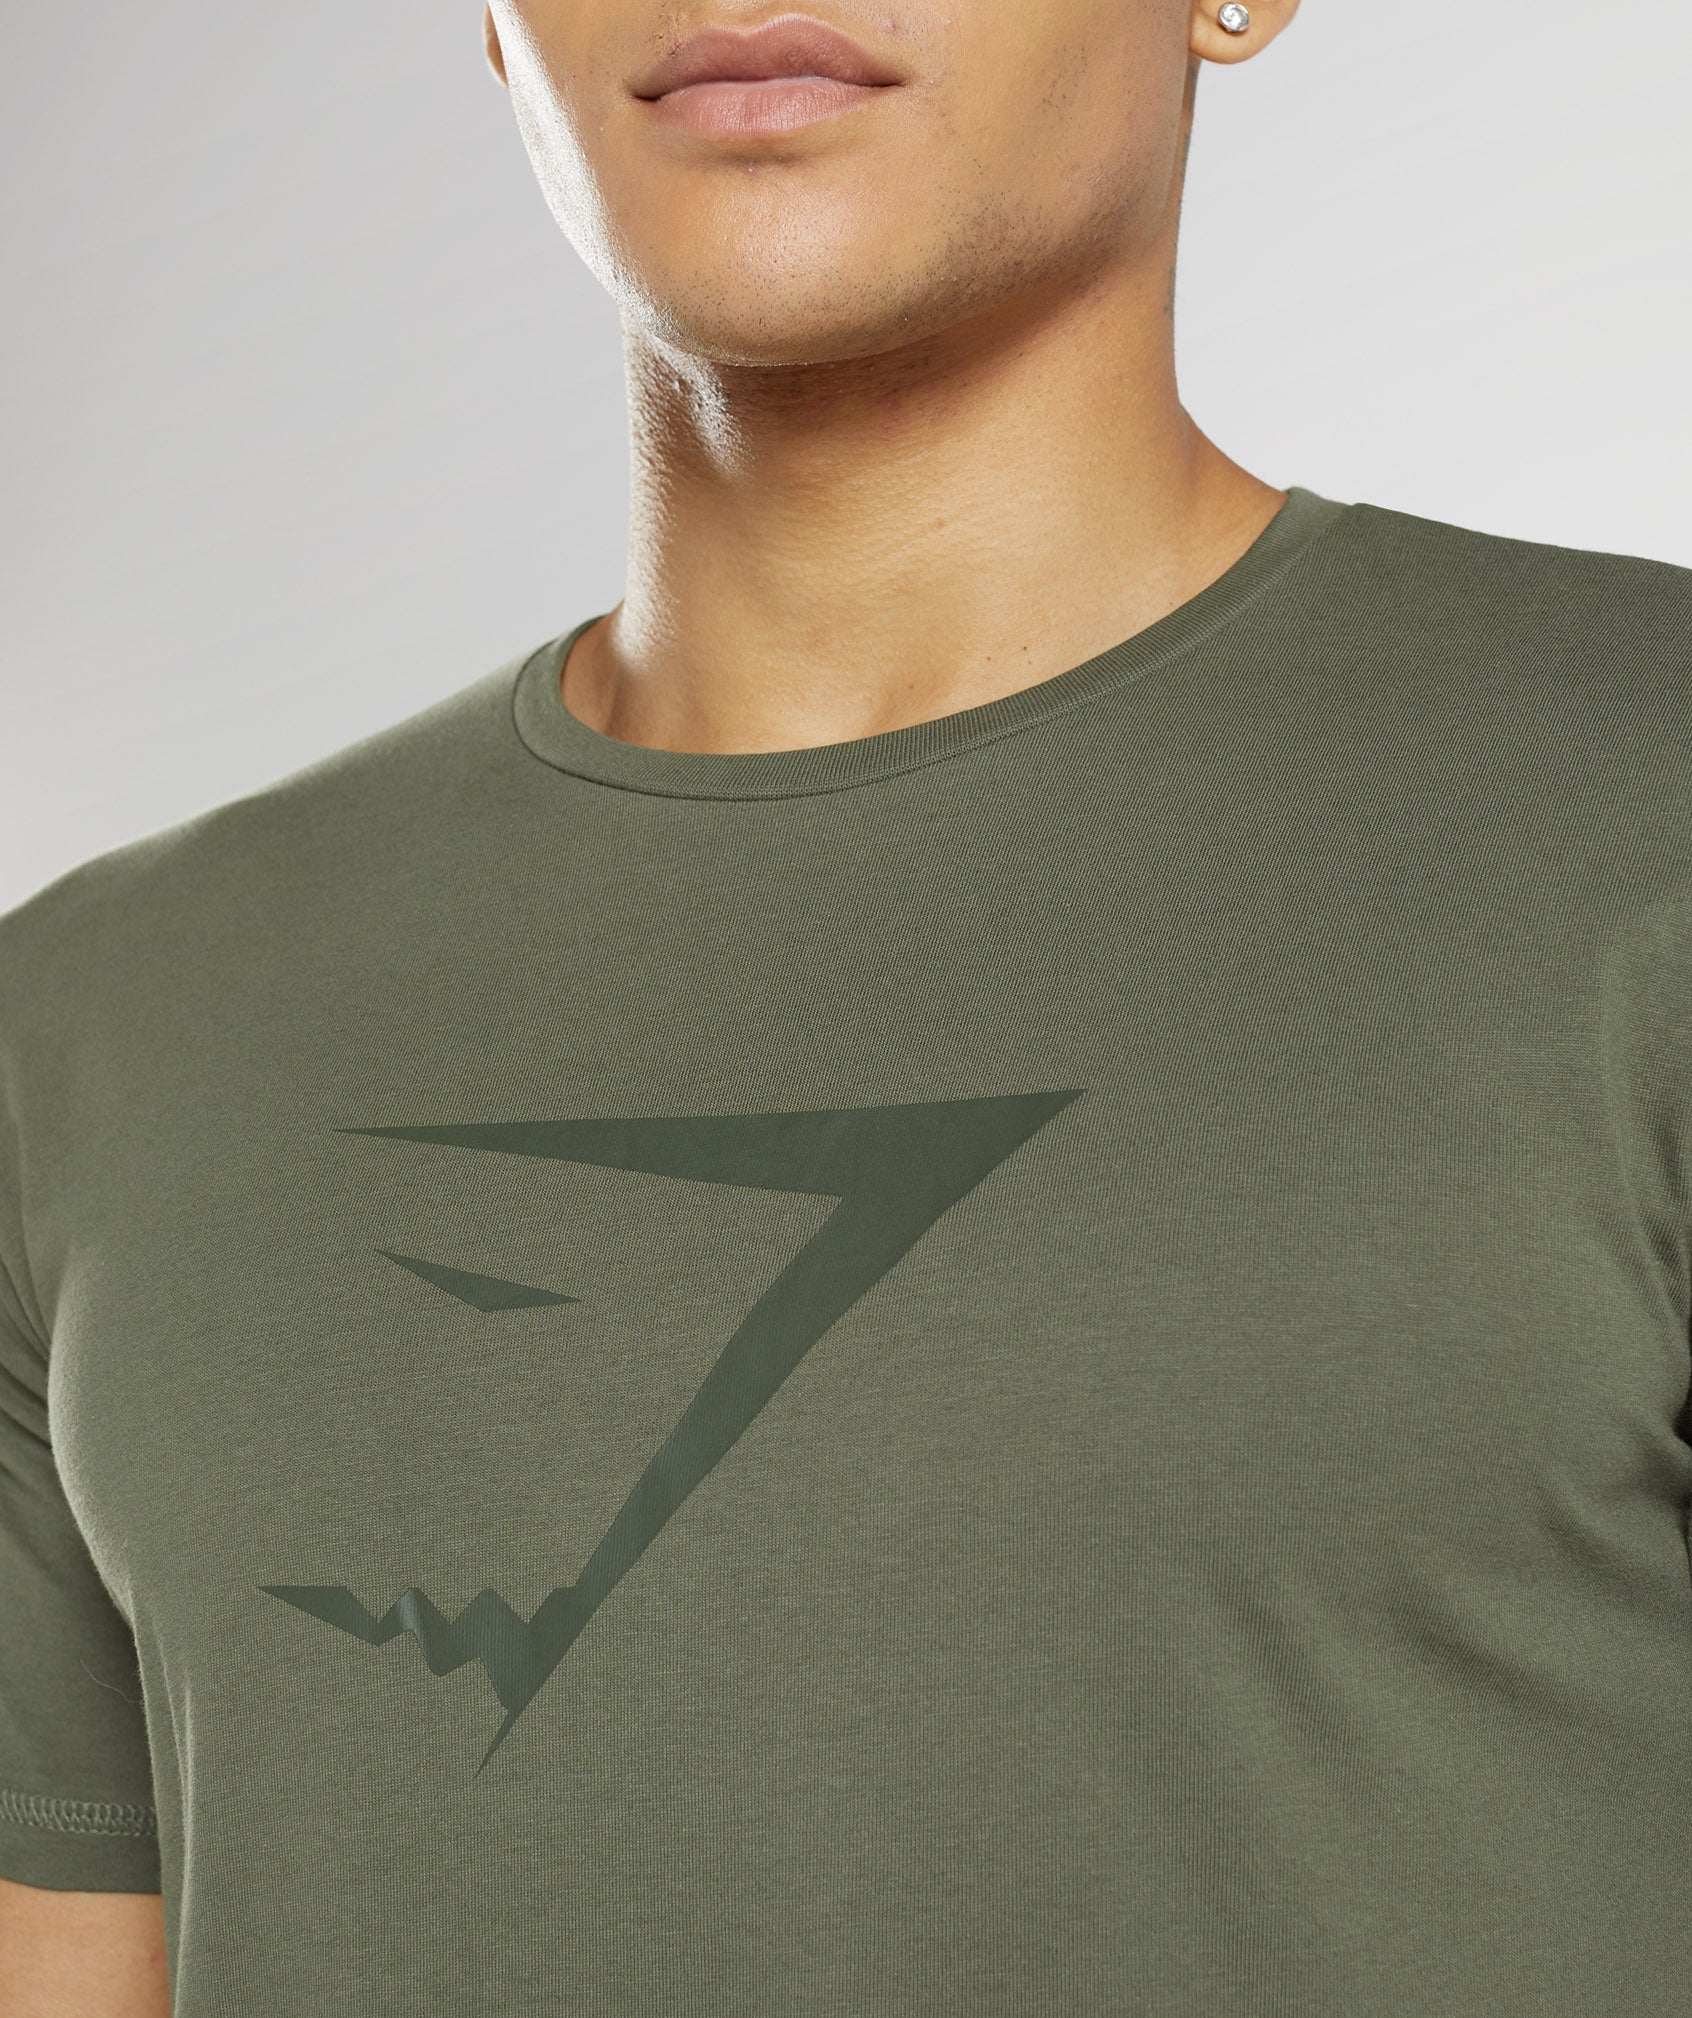 Sharkhead Infill T-Shirt in Core Olive - view 3